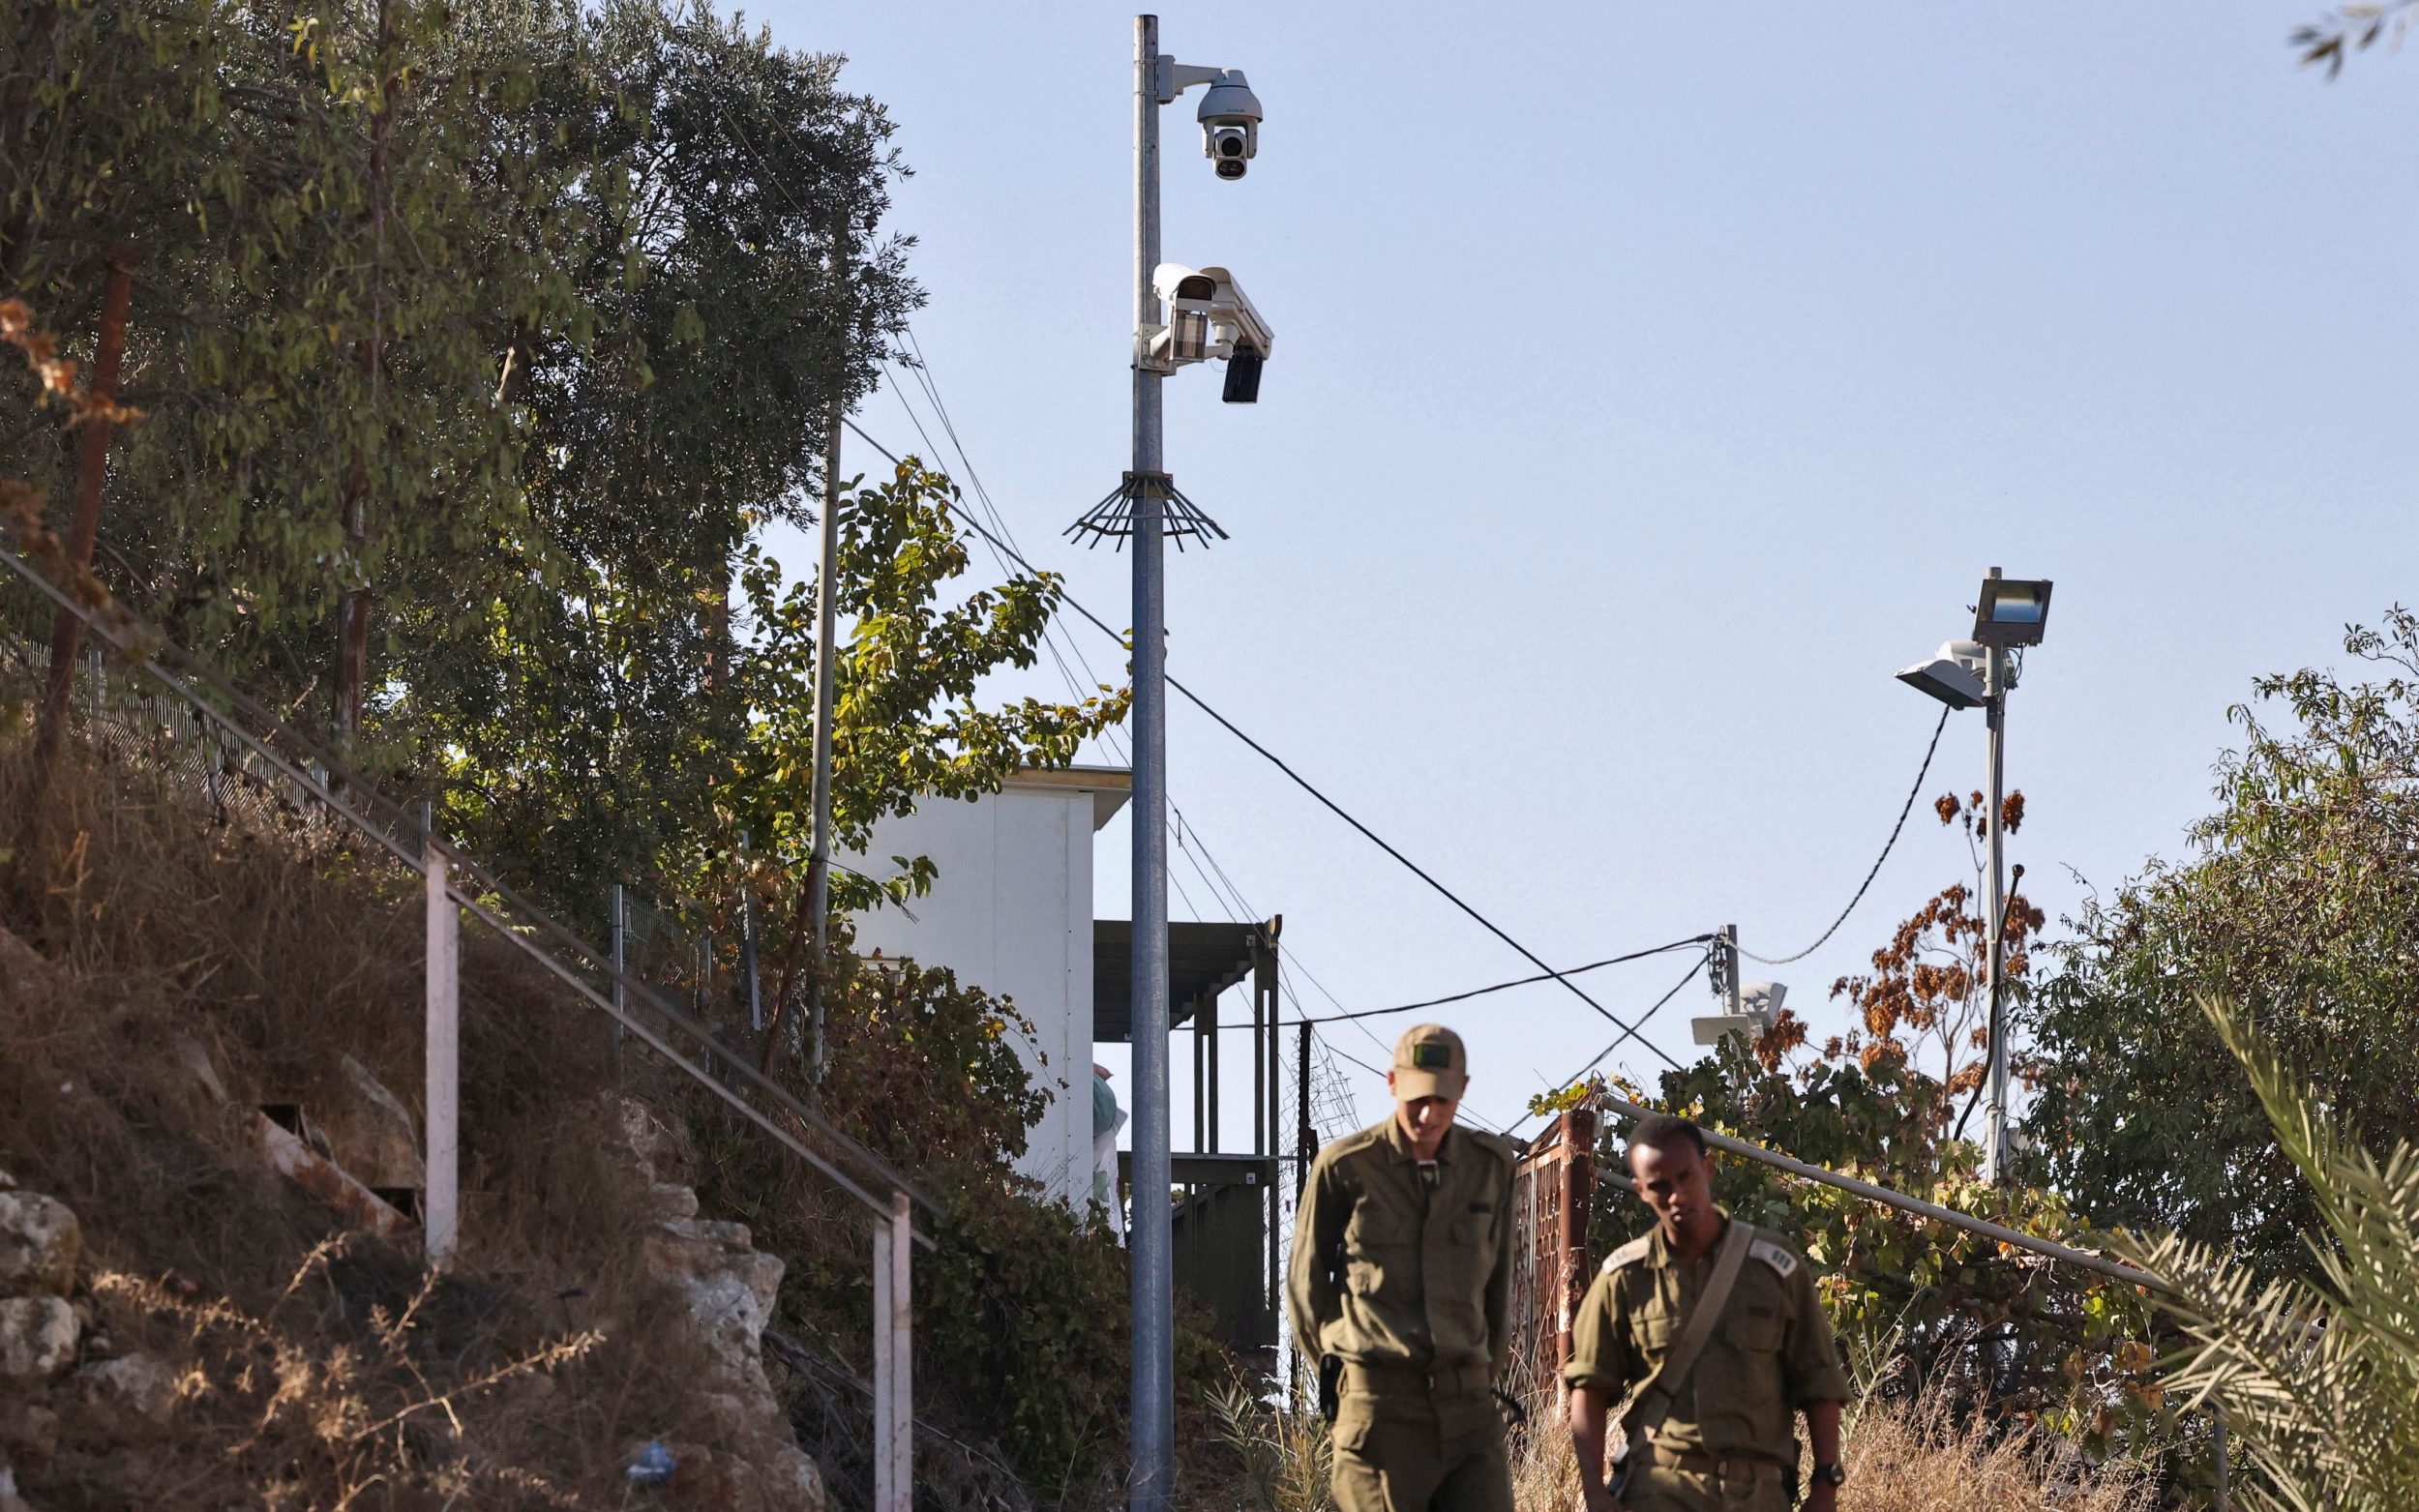 israel is using facial recognition technology to pinpoint hamas terrorists in gaza, reports say